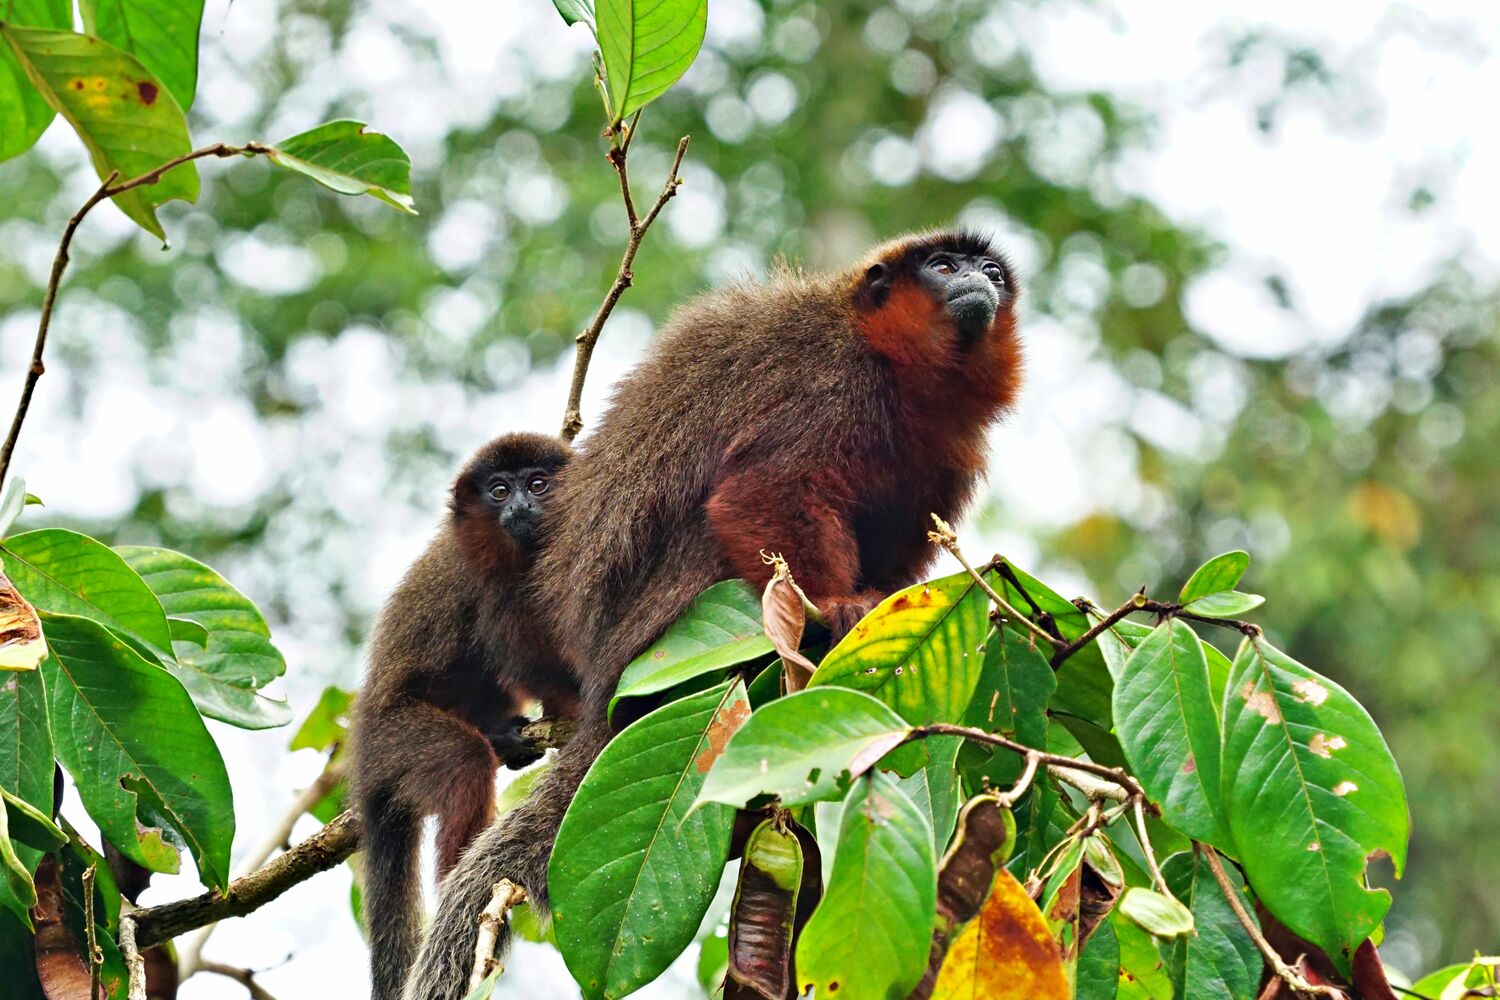 This young coppery titi monkey (Plecturocebus cupreus) benefits from paternal care. The males of the pair living titi monkeys are primarily taking care of the offspring.